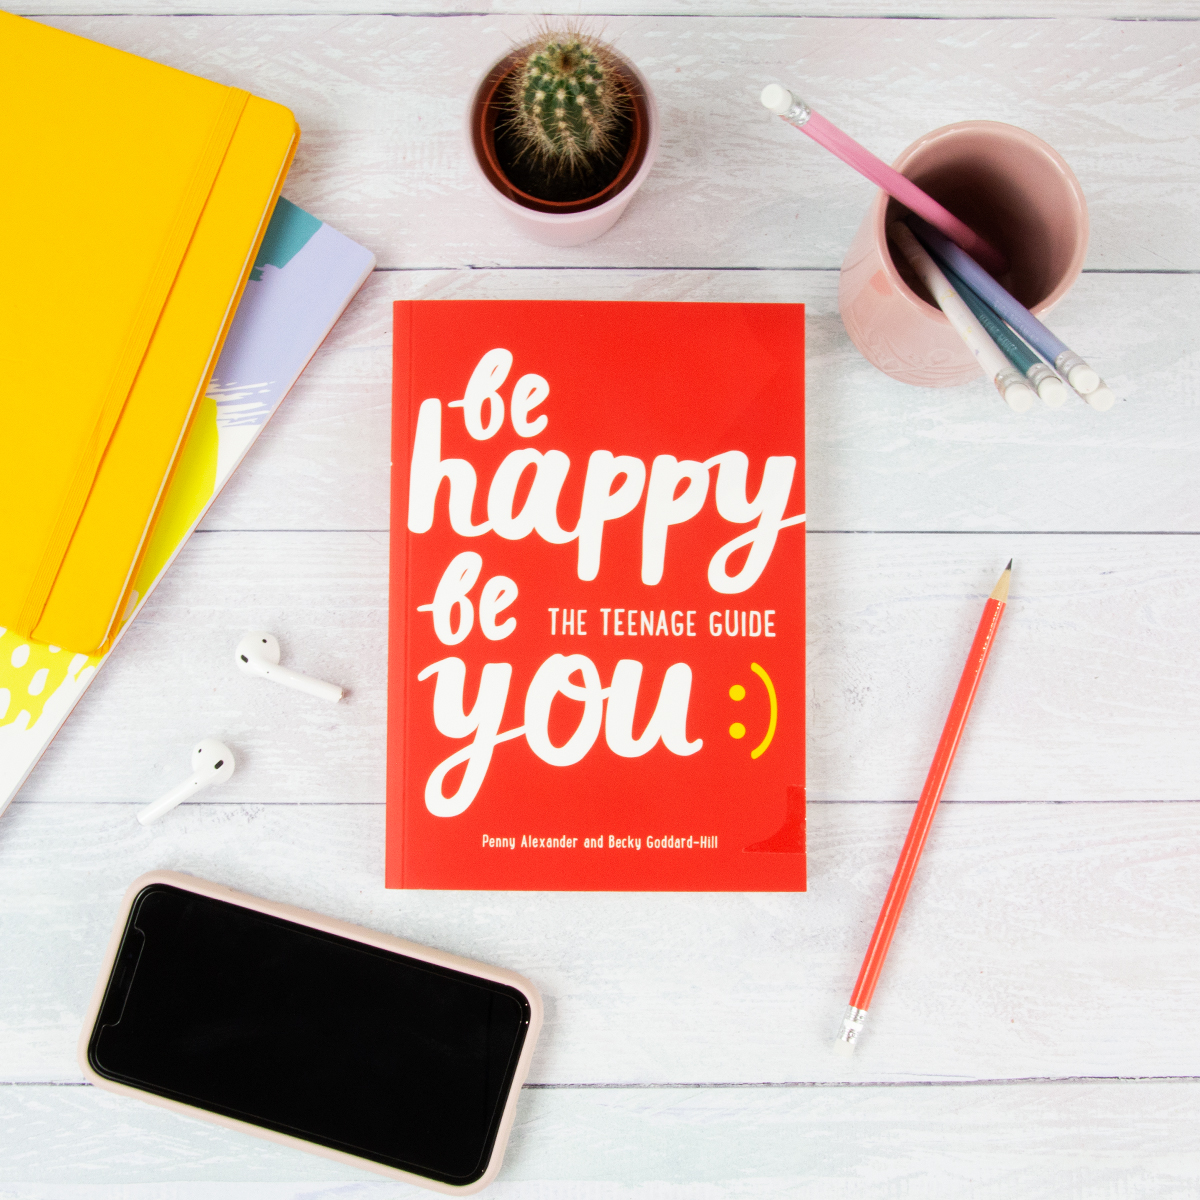 Be Happy Be You - a teenage guide to happiness